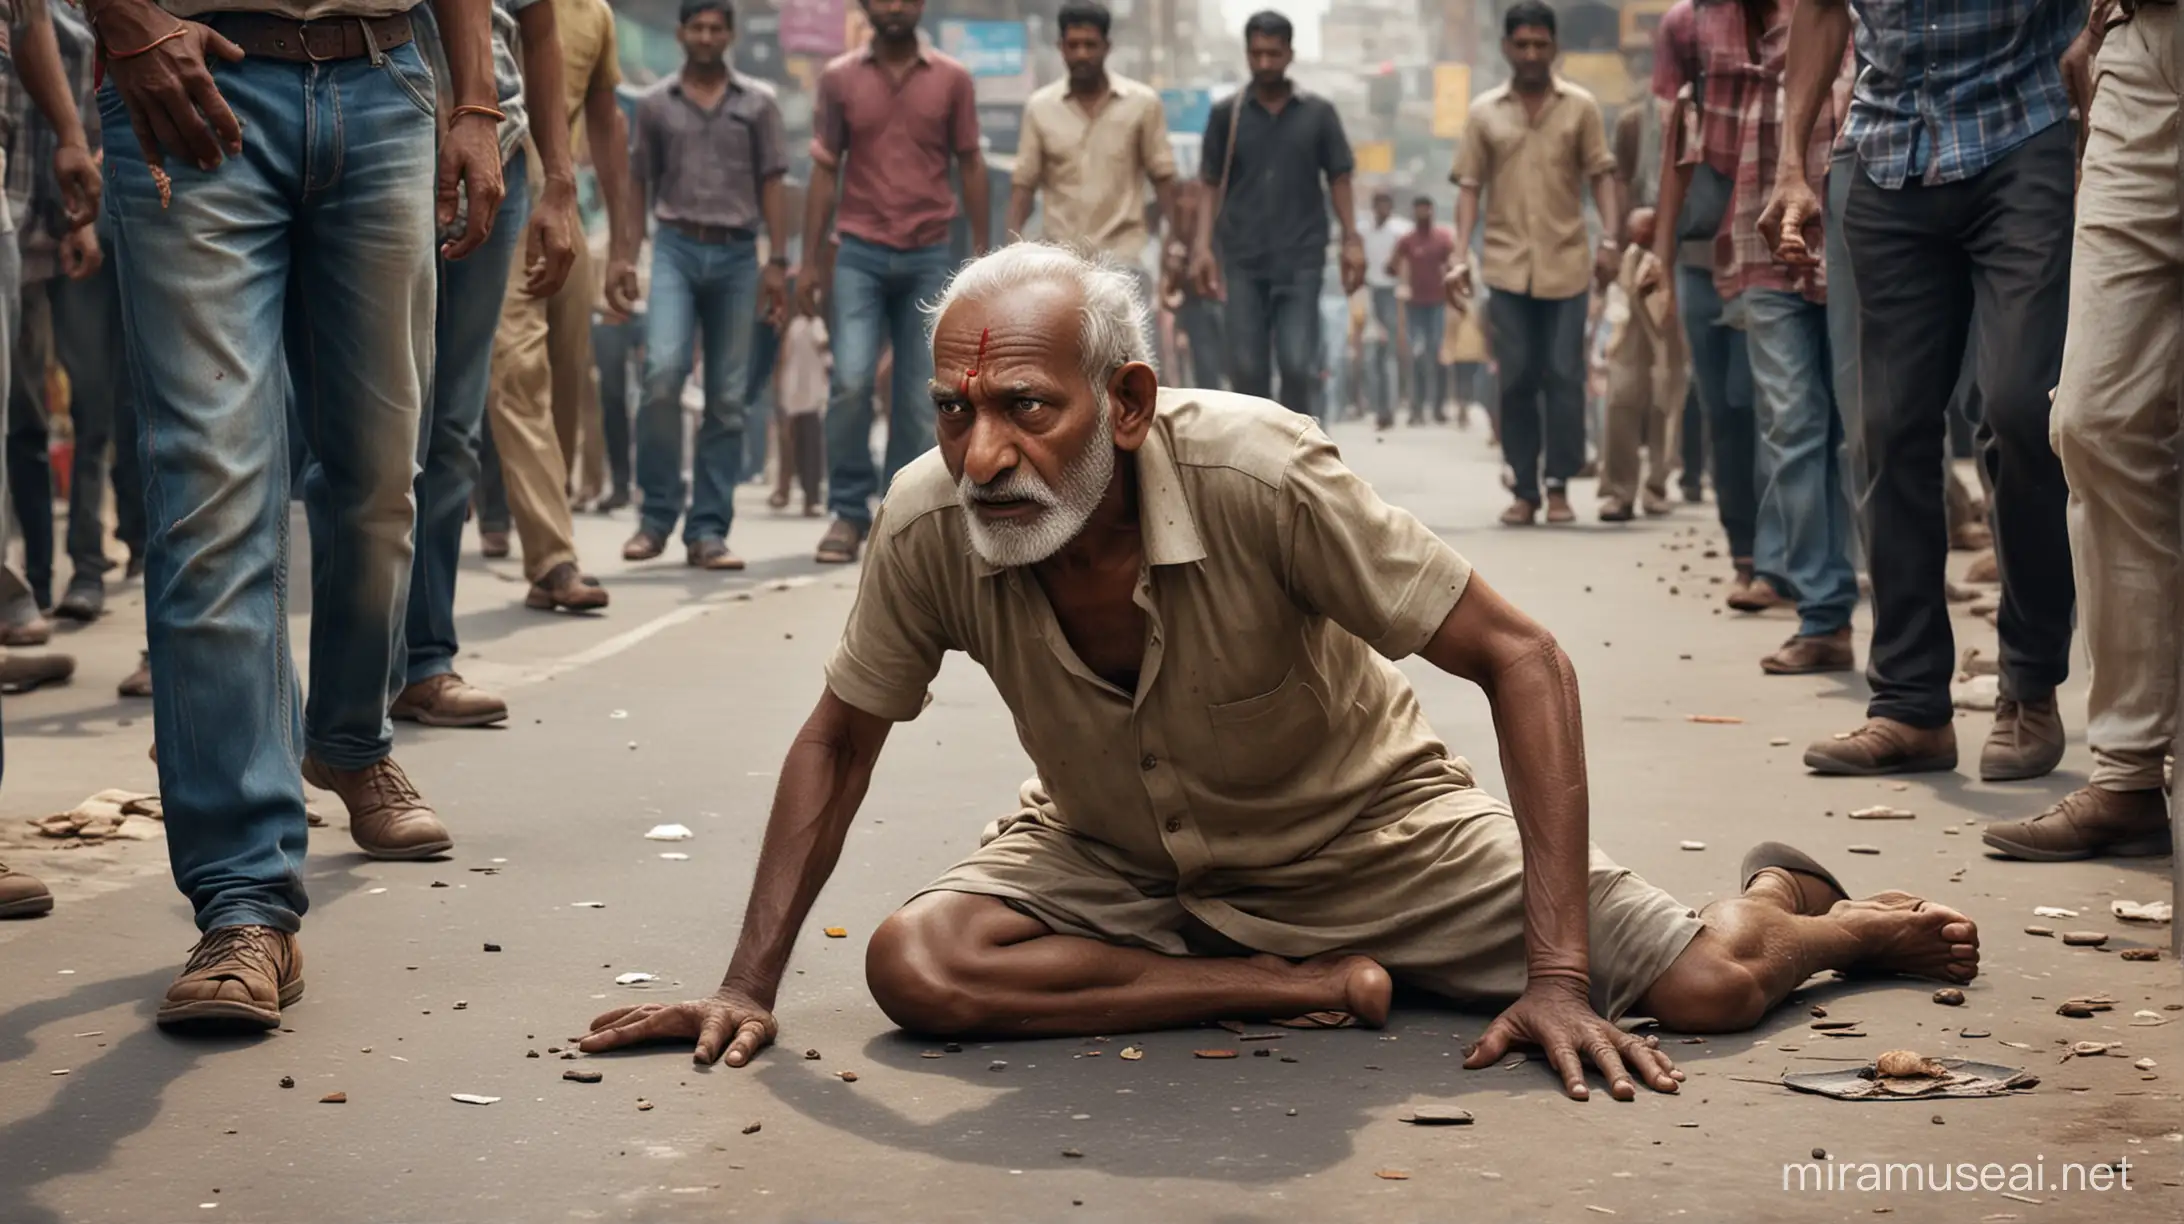 The indian crowd beat up the old man on street, hyper realistic, hyper detailed